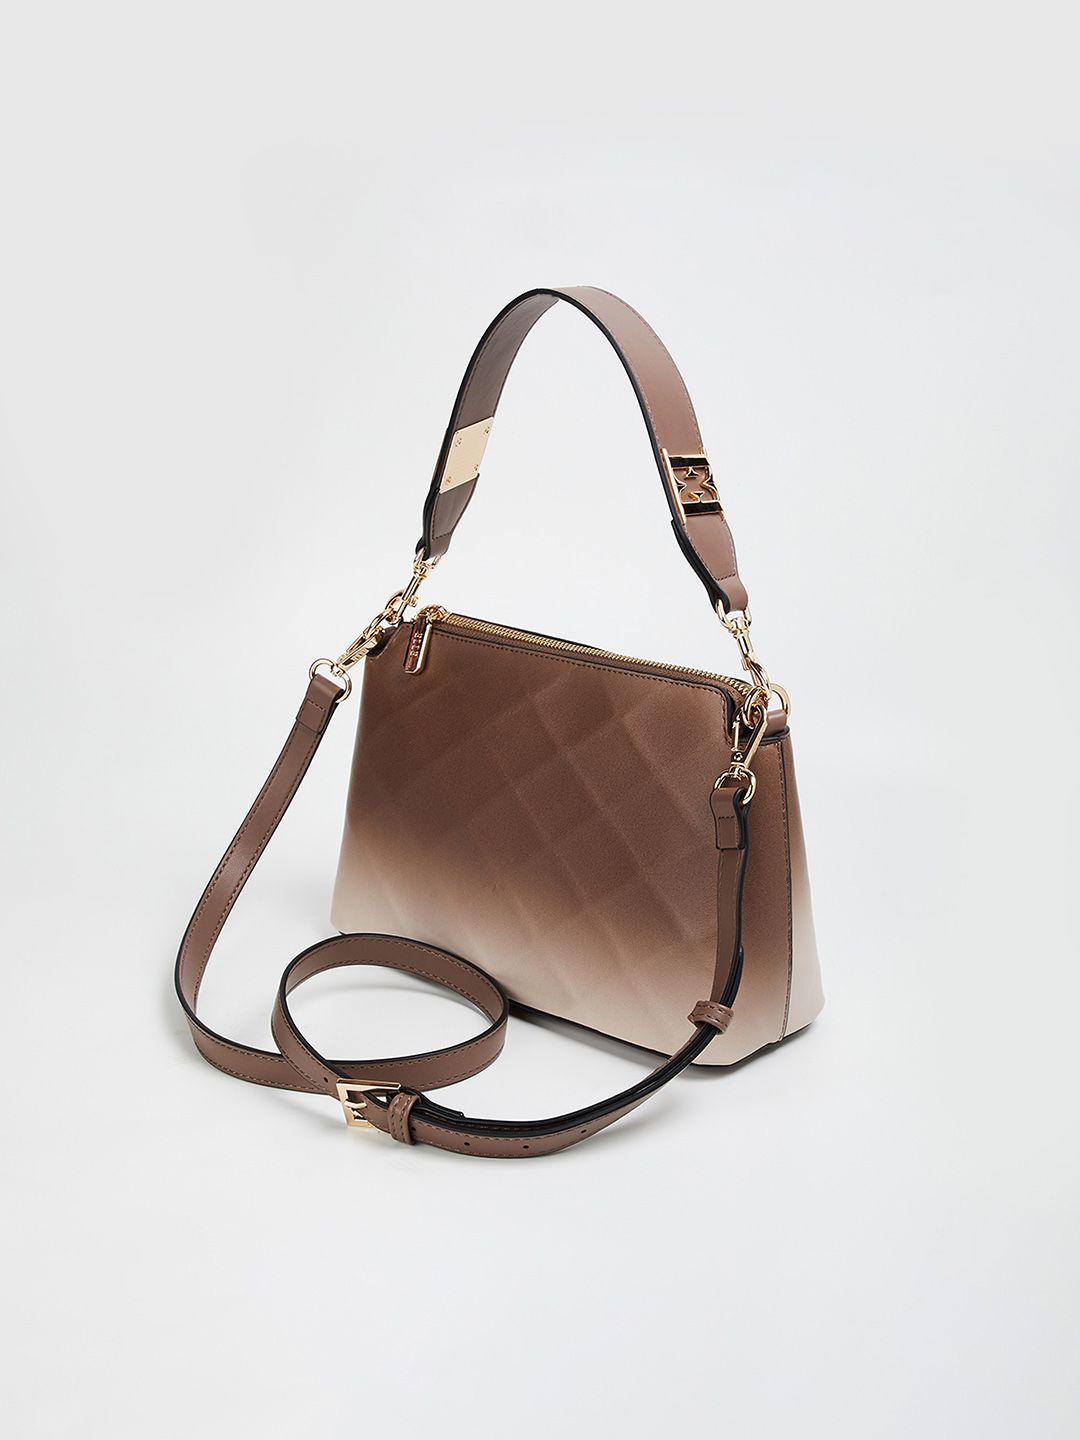 elle textured structured handheld bag with quilted